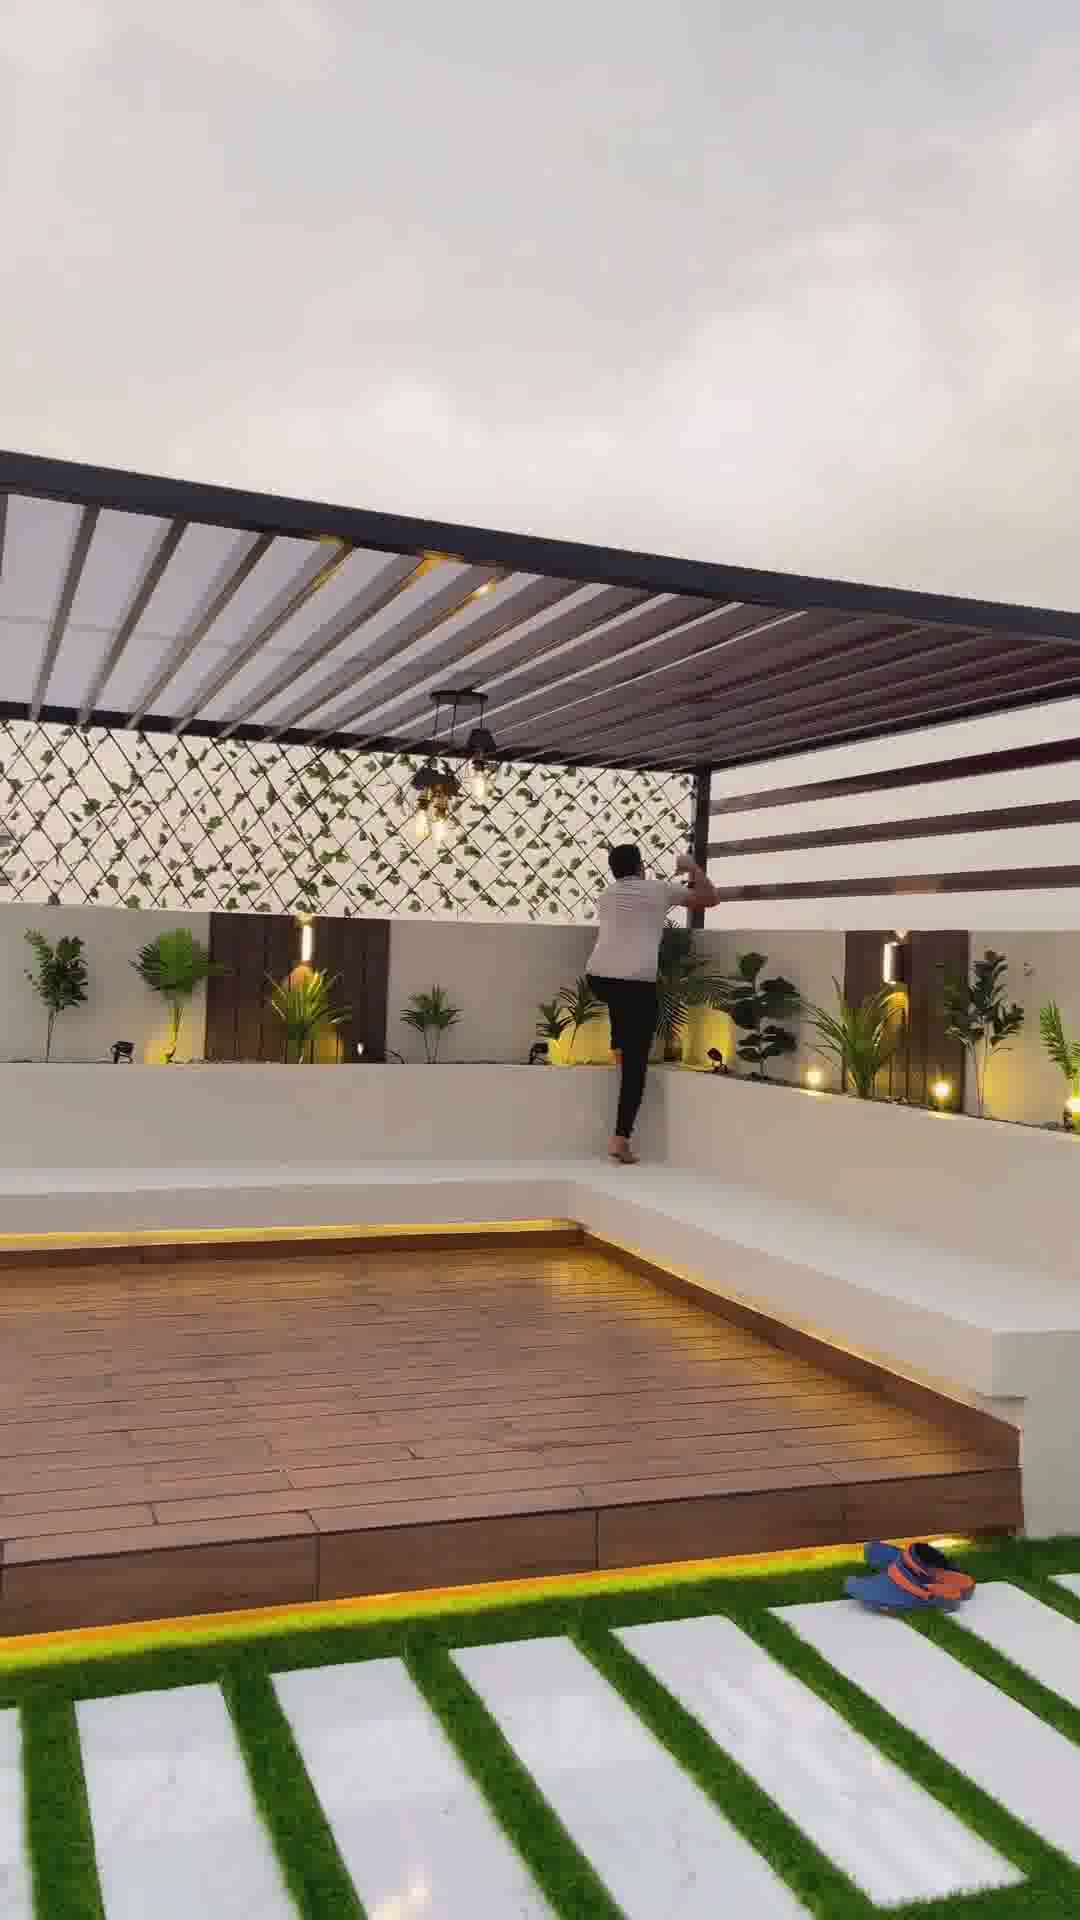 Terrace Garden Designers and Outdoor Terrace Products, Delhi

Bring luxury to your outdoors with exclusive terrace garden designs and customised garden products by bhatiya interior - Terrace Garden Designers in Delhi

#terrace 
#bhatiyainterior